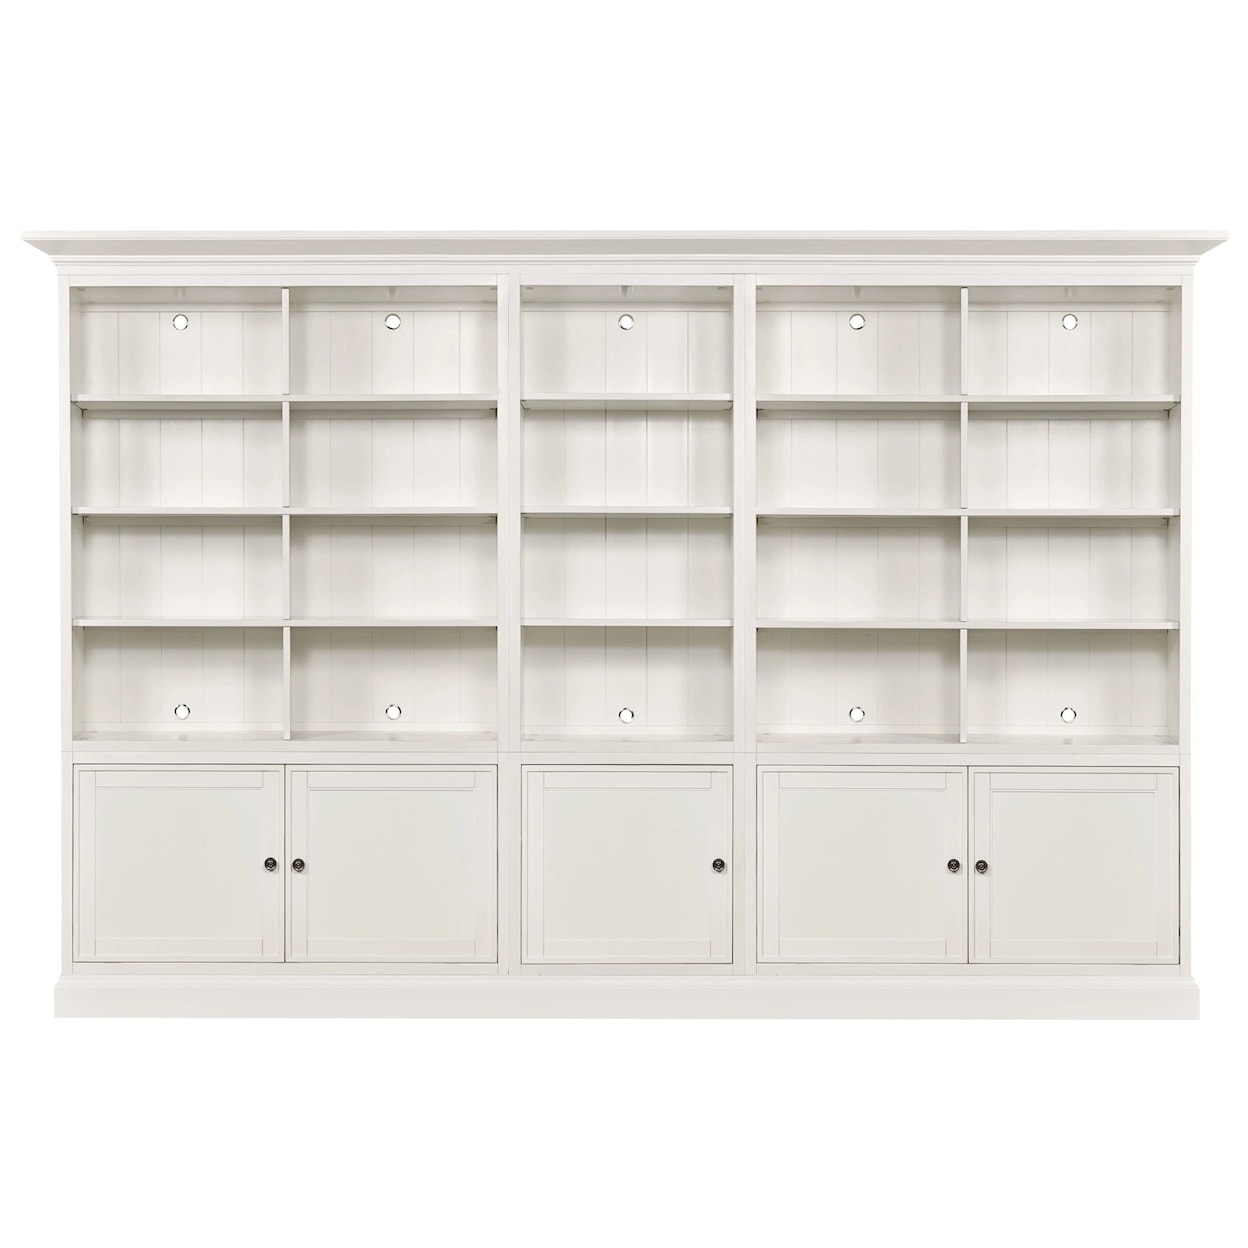 Hammary Structures Quintuple Display Bookcase